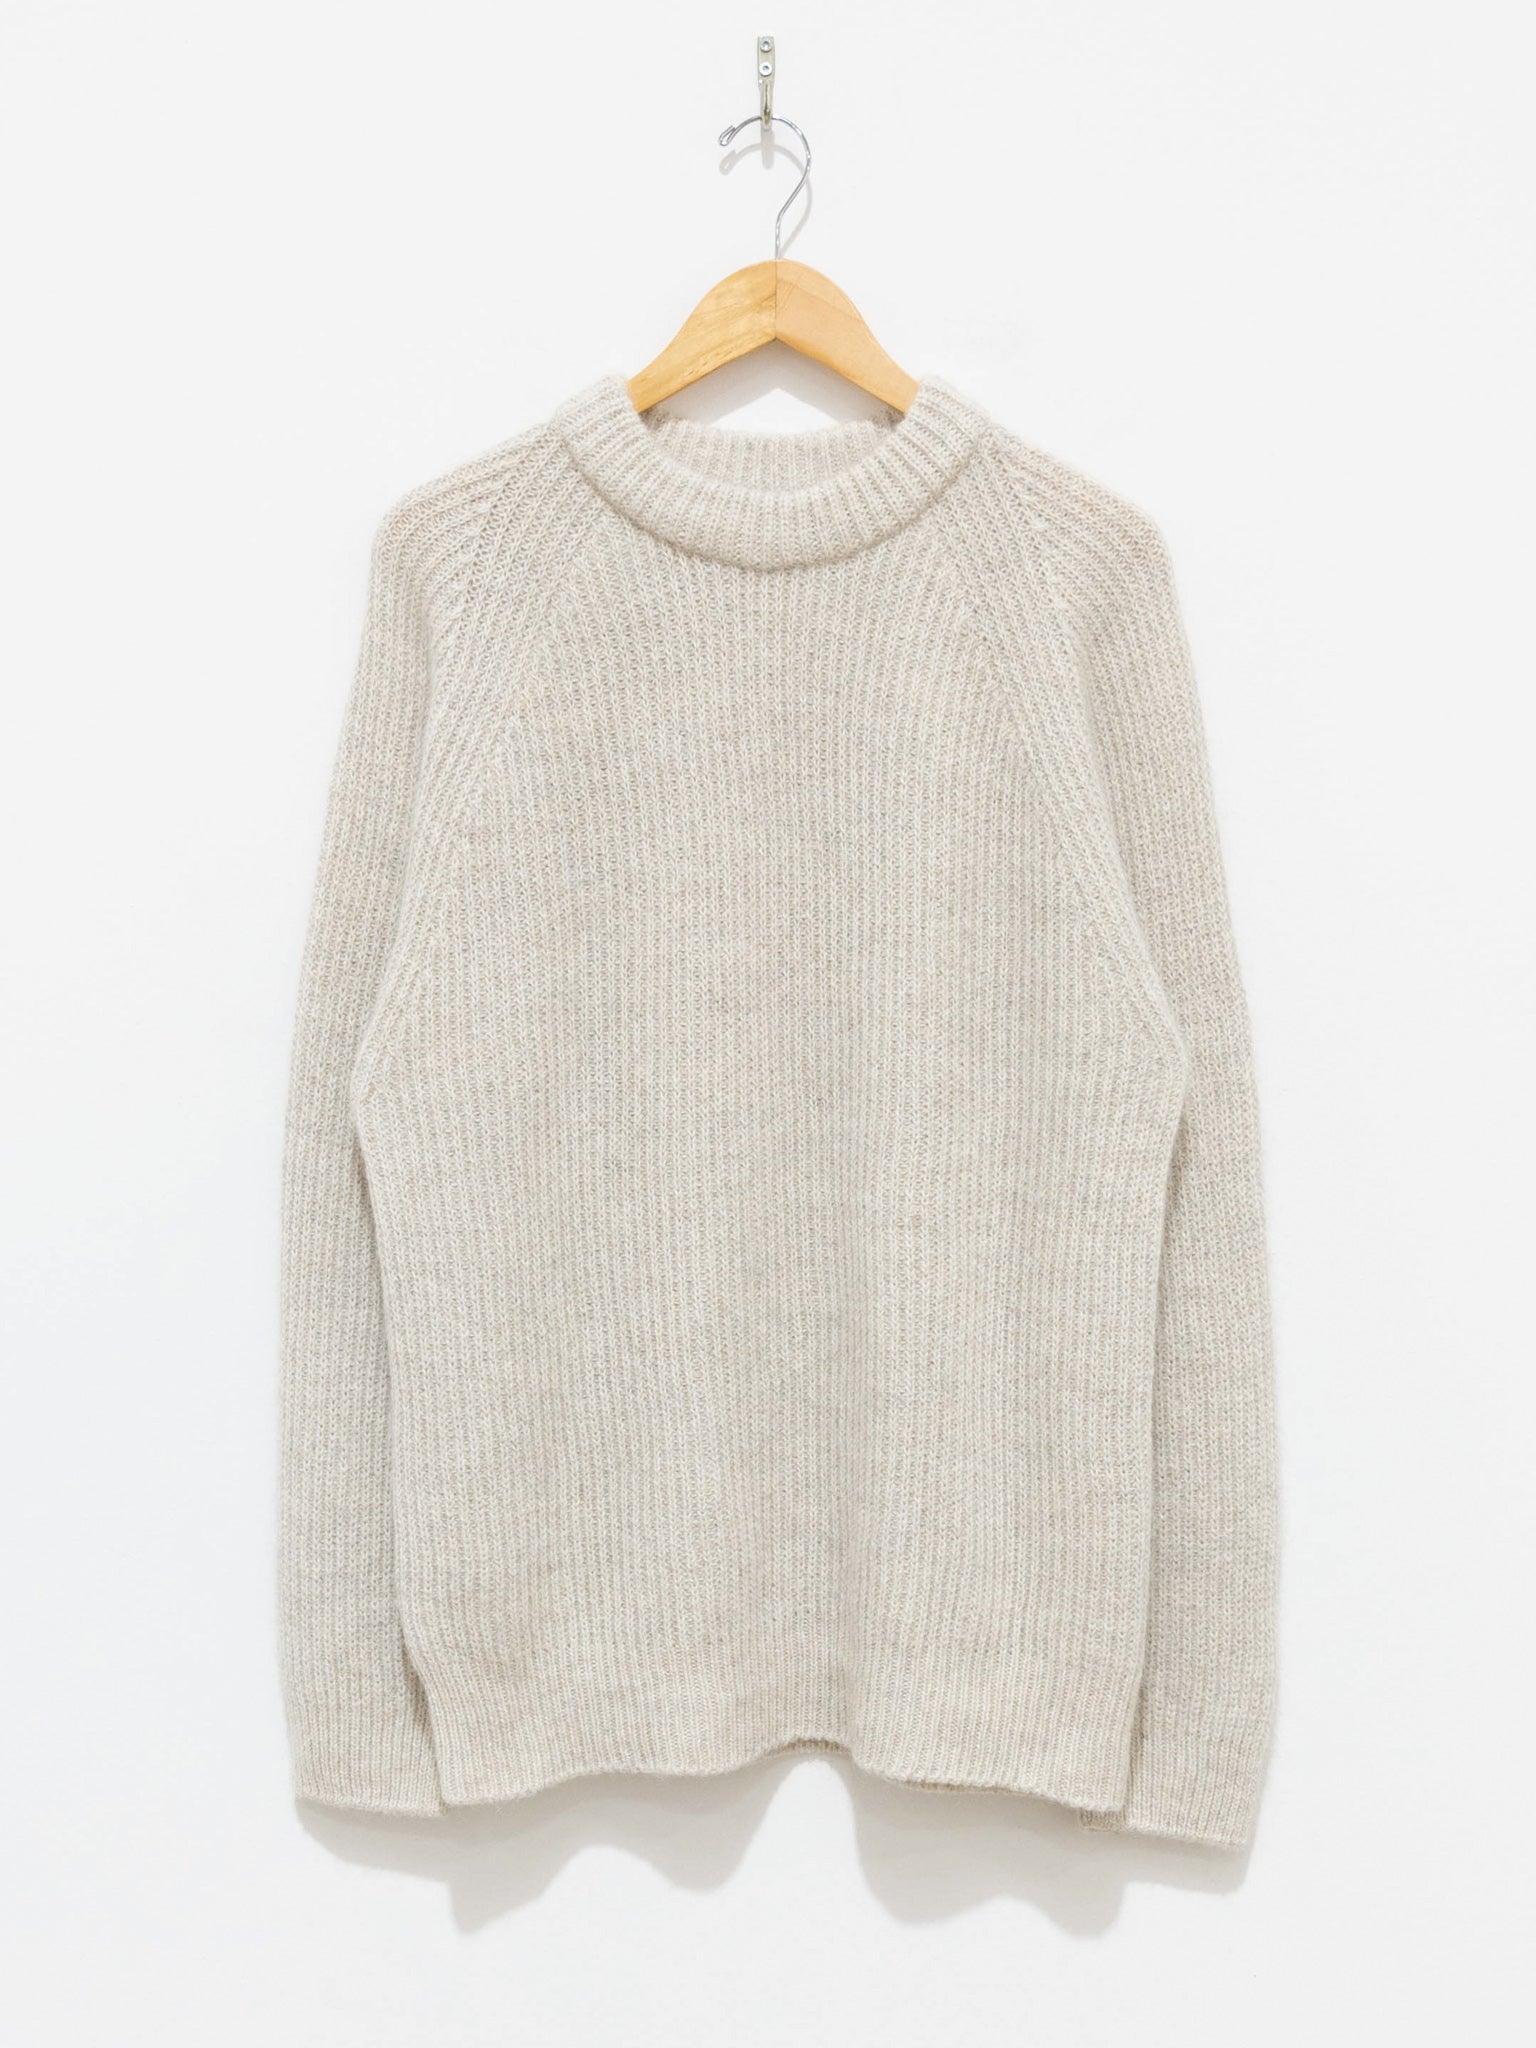 Royal Baby Alpaca Ribbed Knit Sweater - Off White Mix